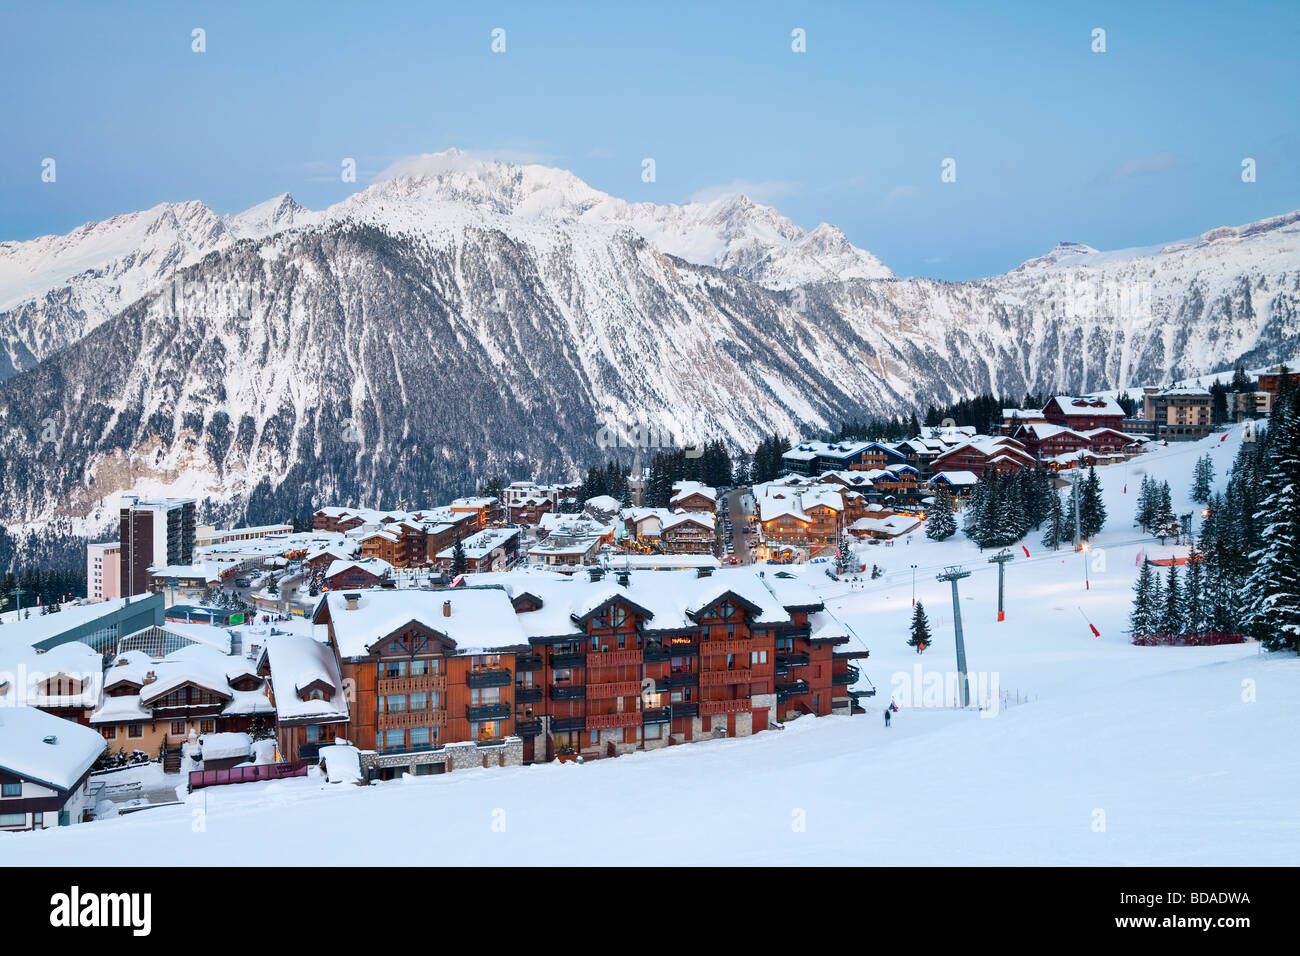 Courchevel 1850 ski resort in the Three Valleys Les Trois Vallees Savoie French Alps France Stock Photo